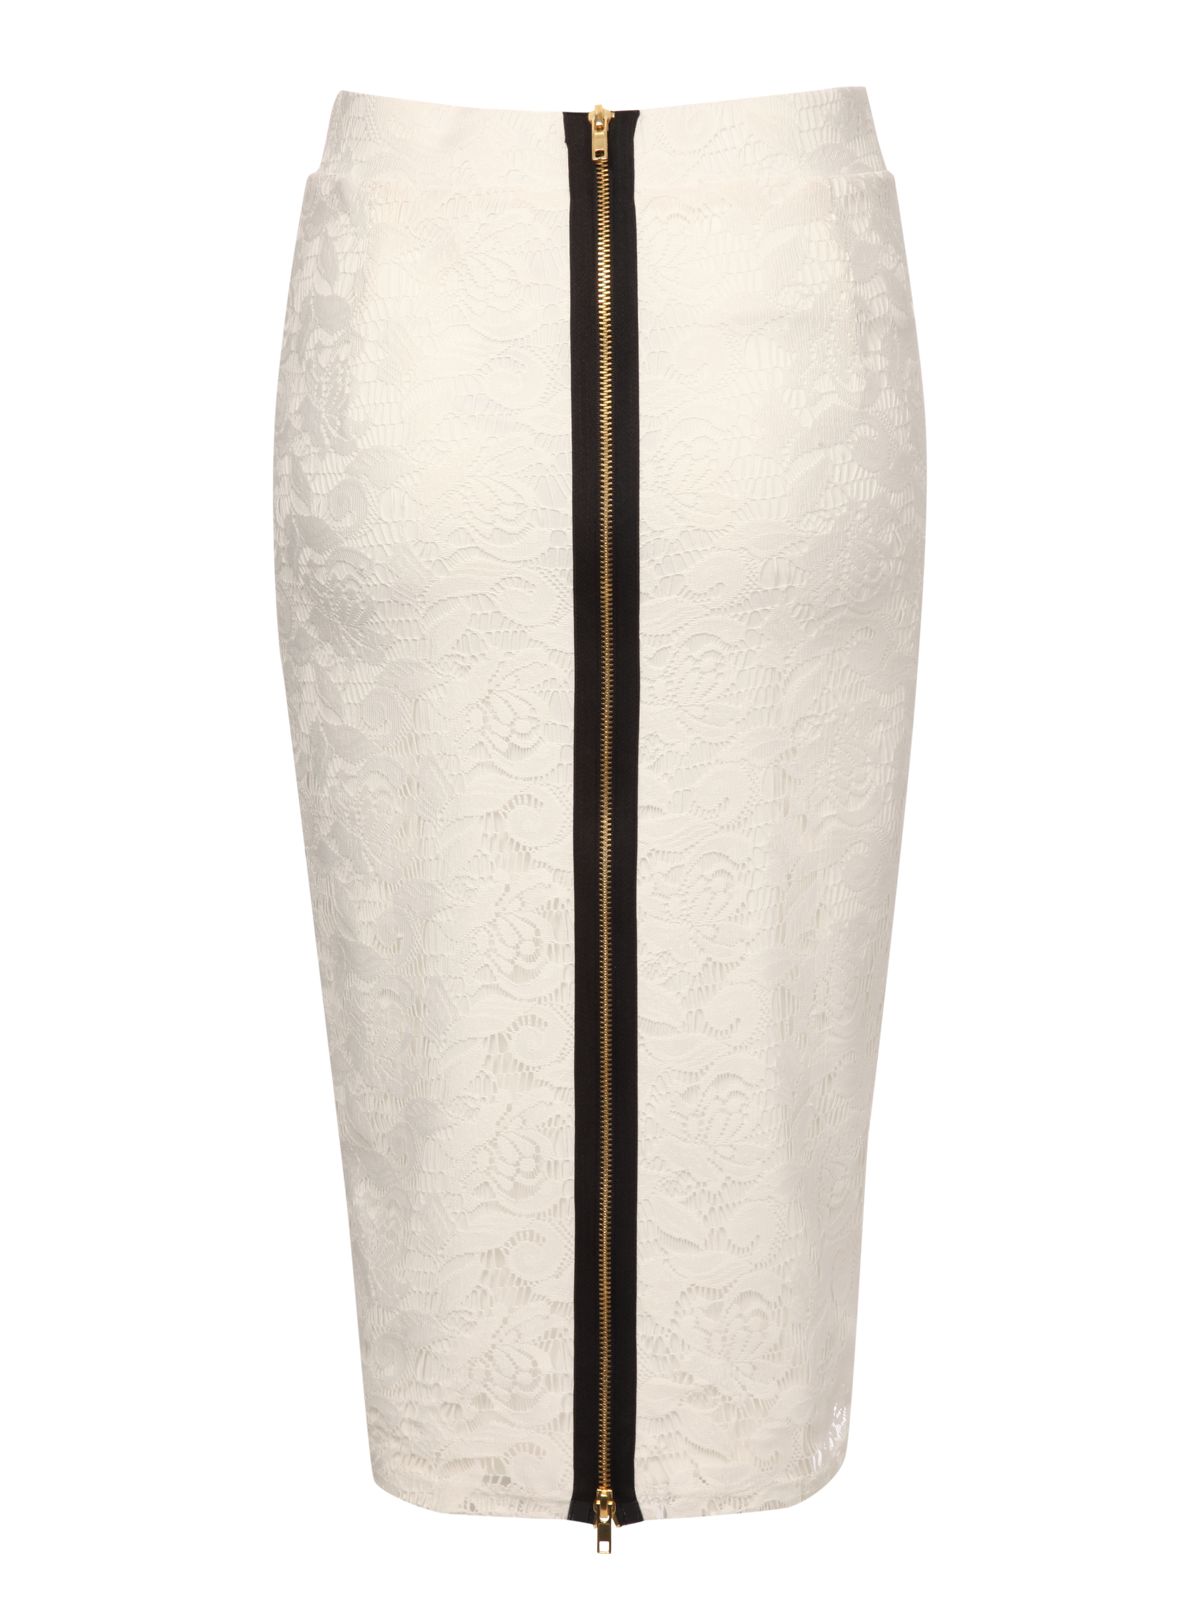 Jane norman Zip Back Lace Pencil Skirt in Natural | Lyst